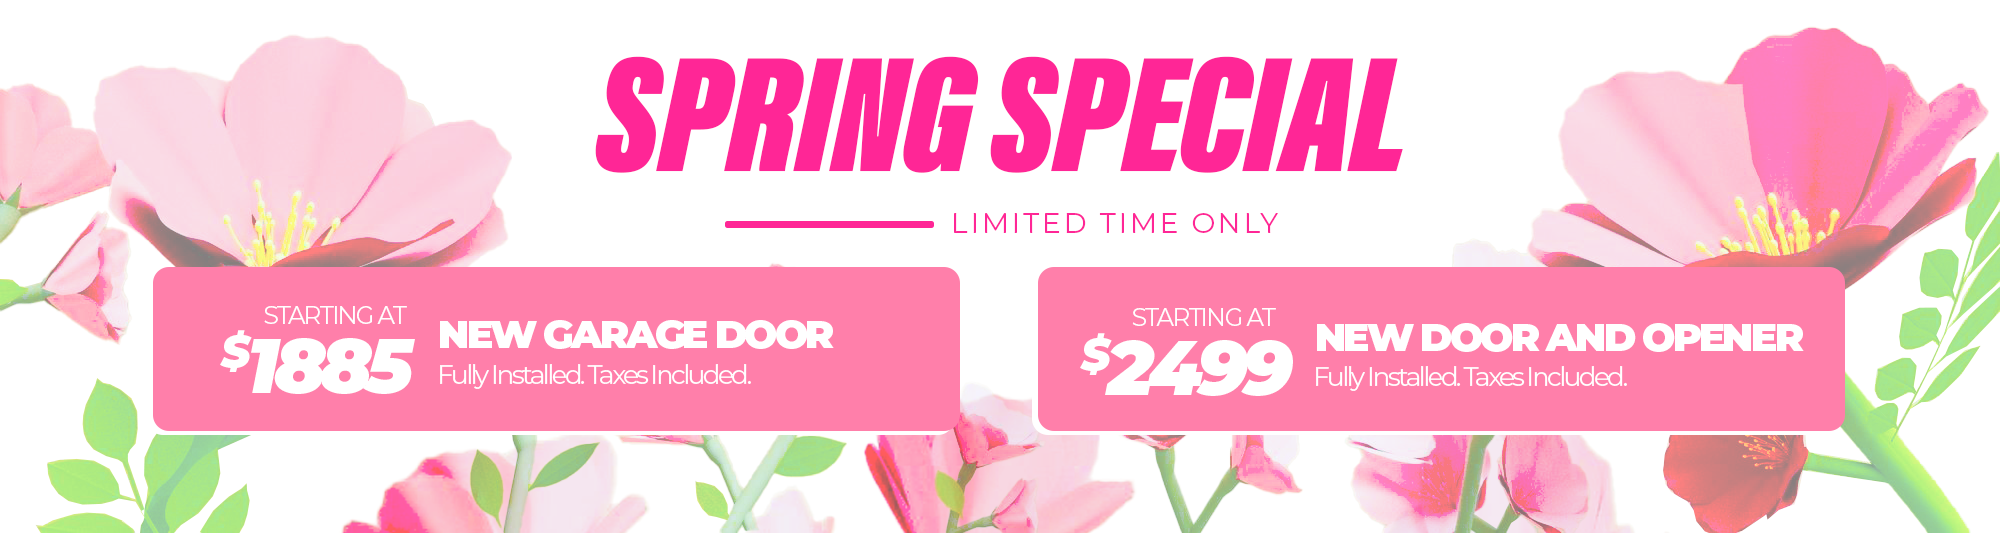 Spring Special Offers